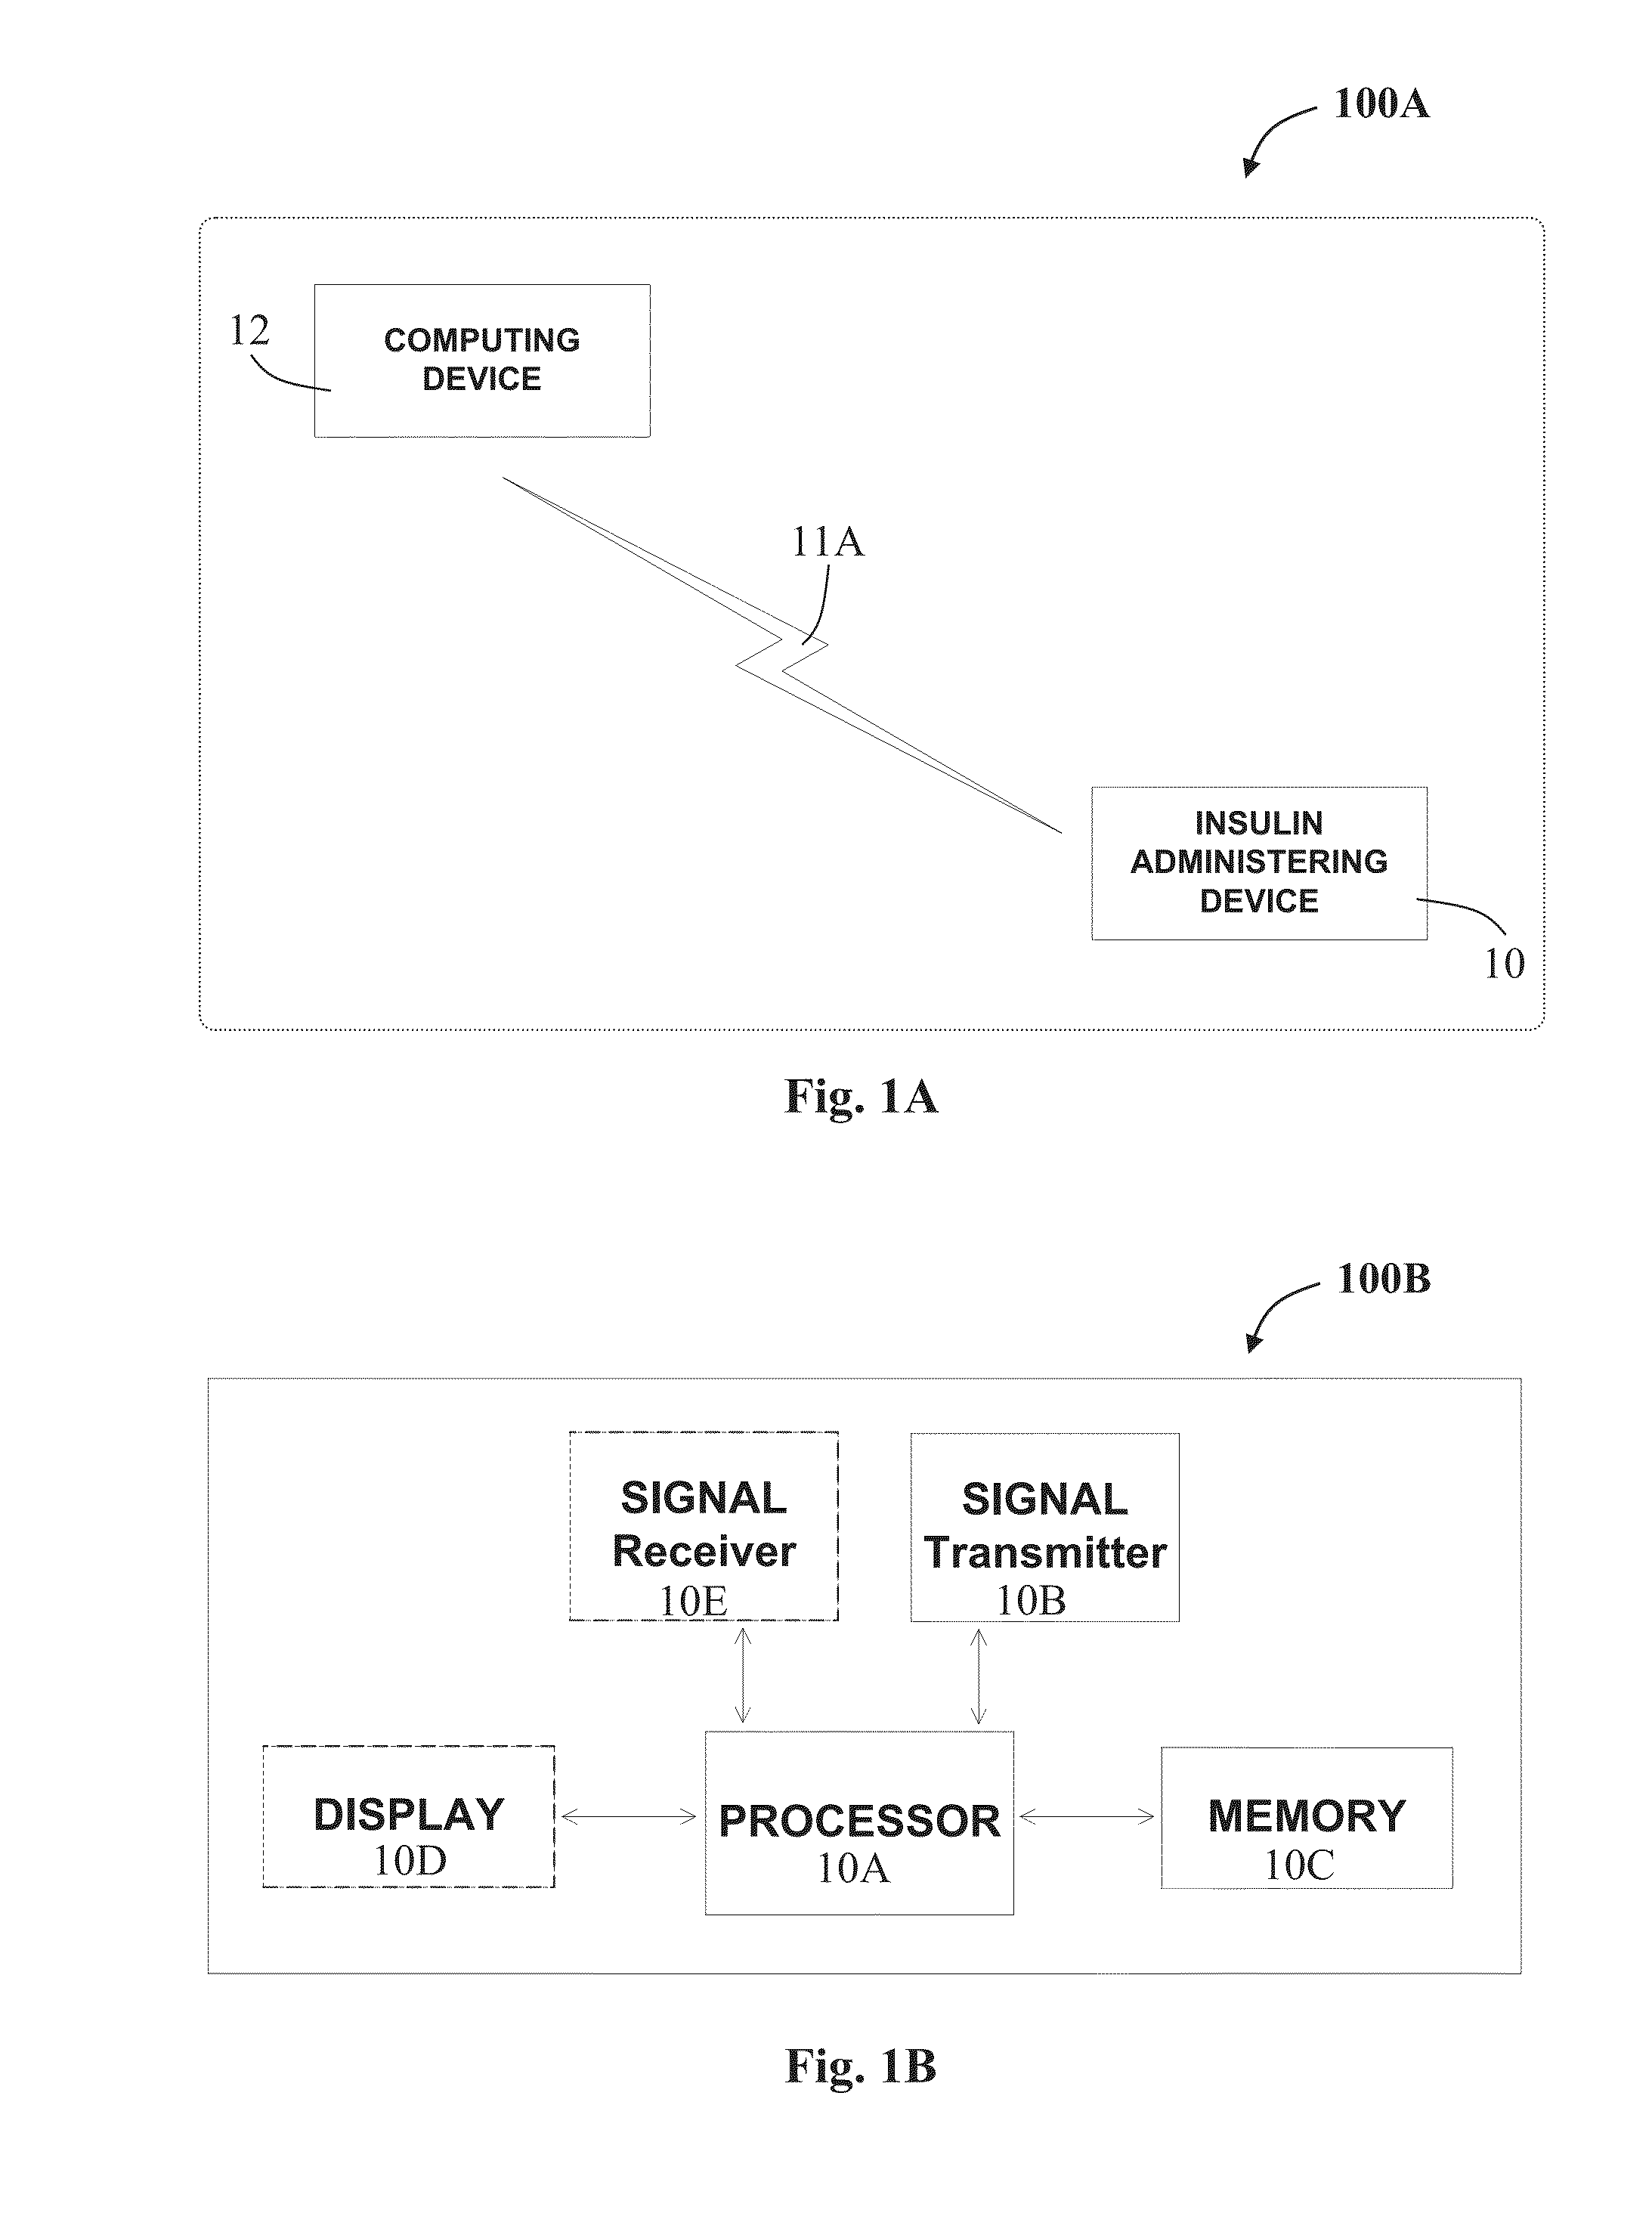 Methods and systems for communicating with an insulin administering device